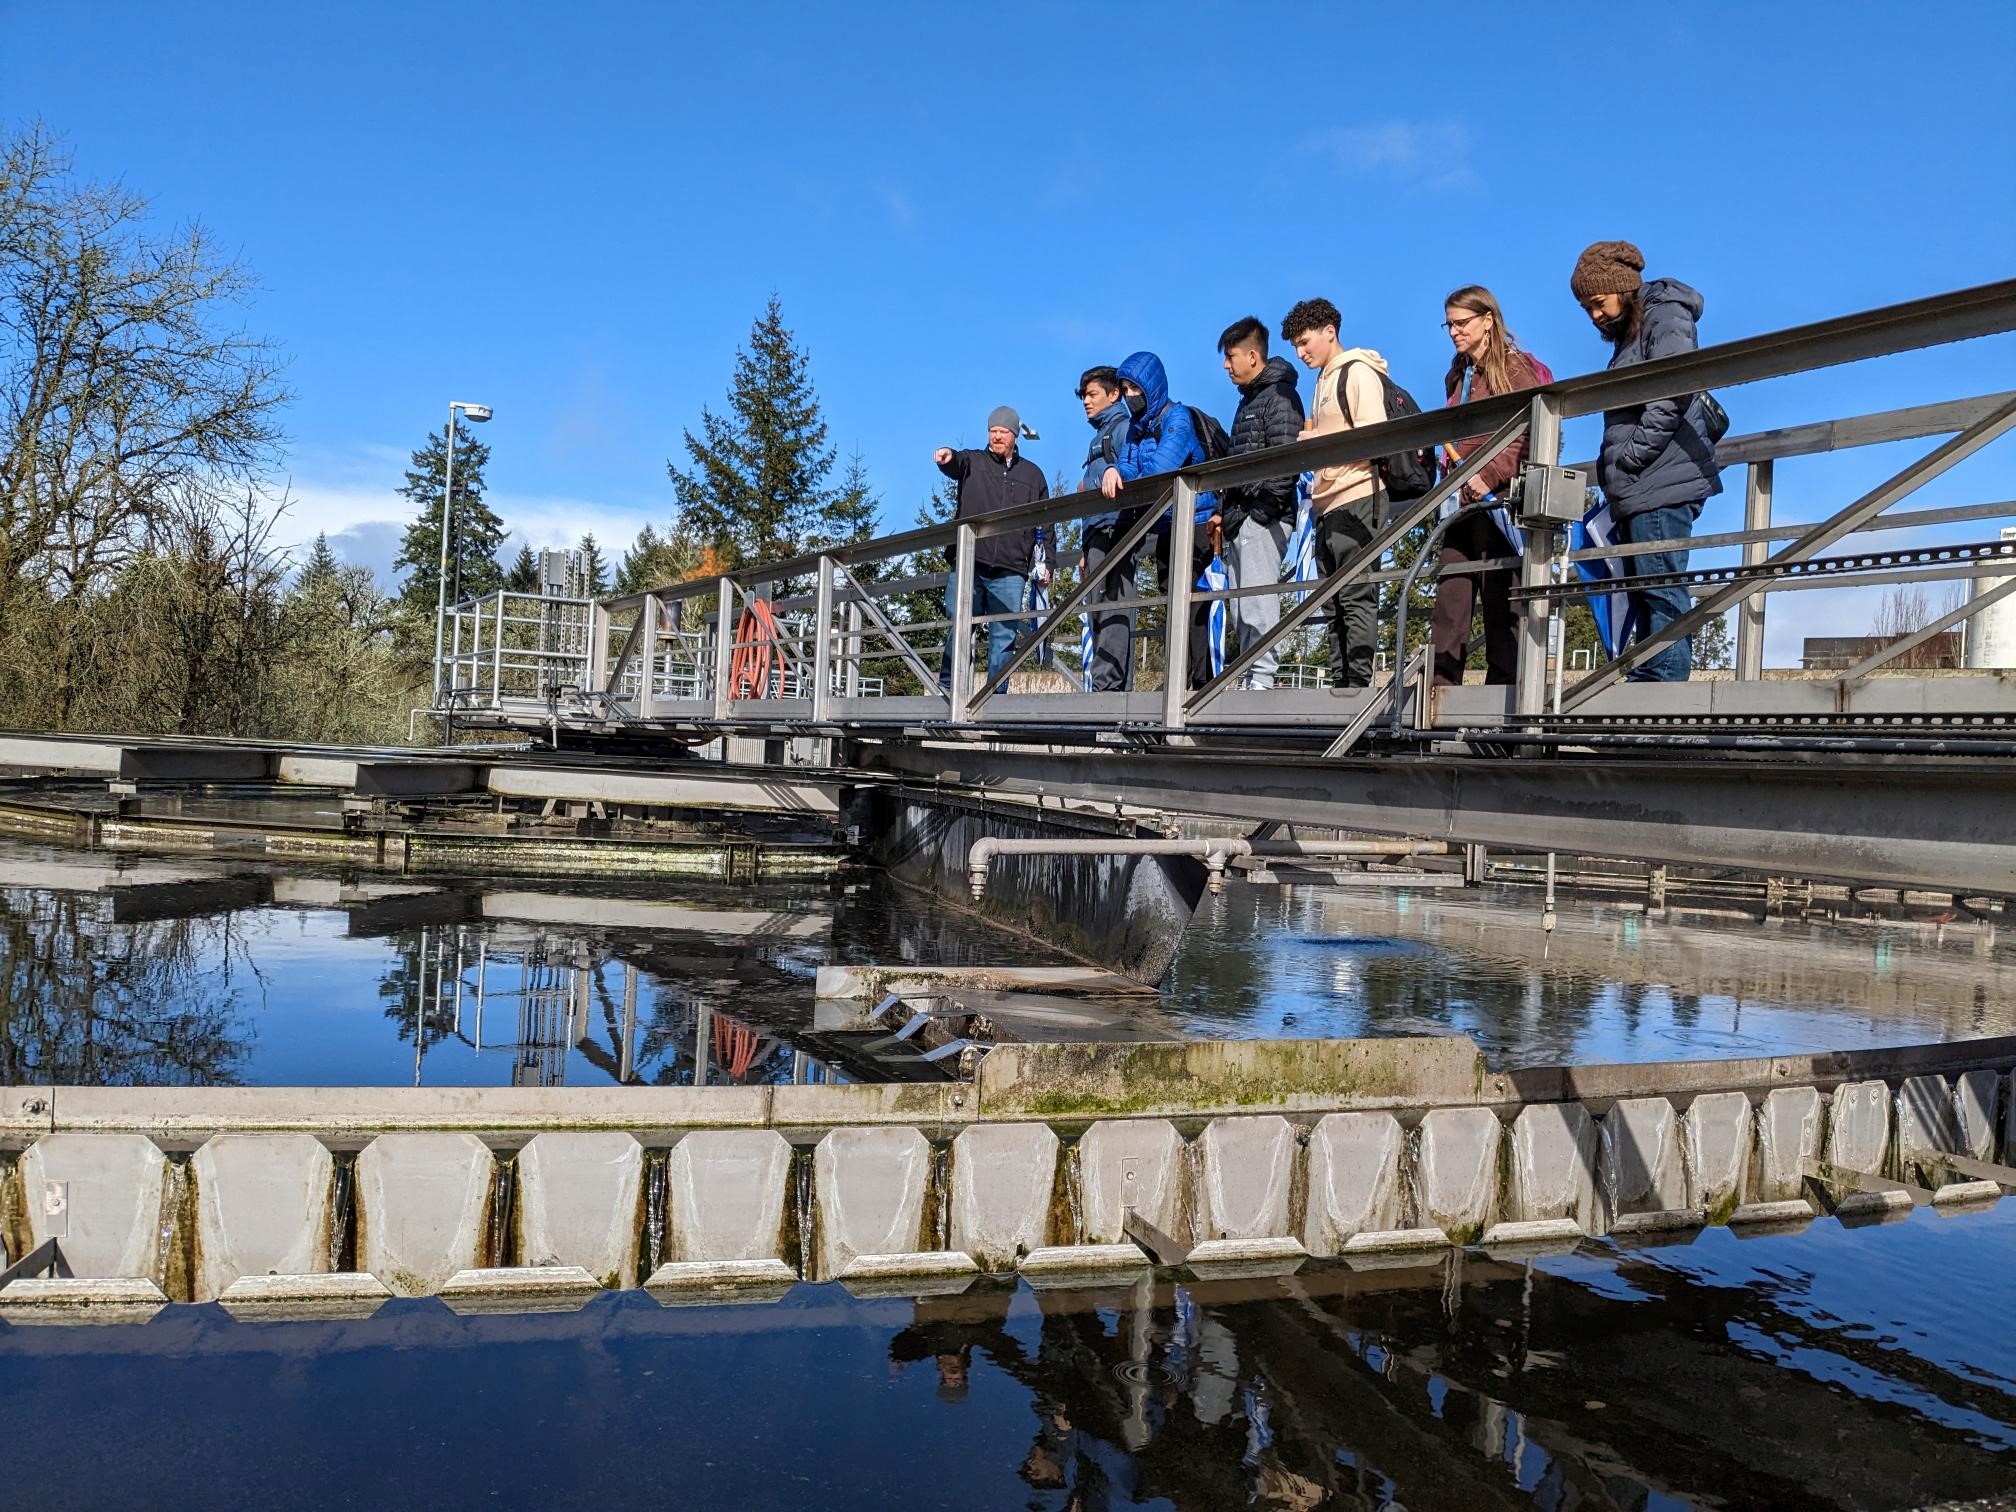 A group of people on the catwalk above a primary clarifier at A CWS Water Resource Recovery Facility.